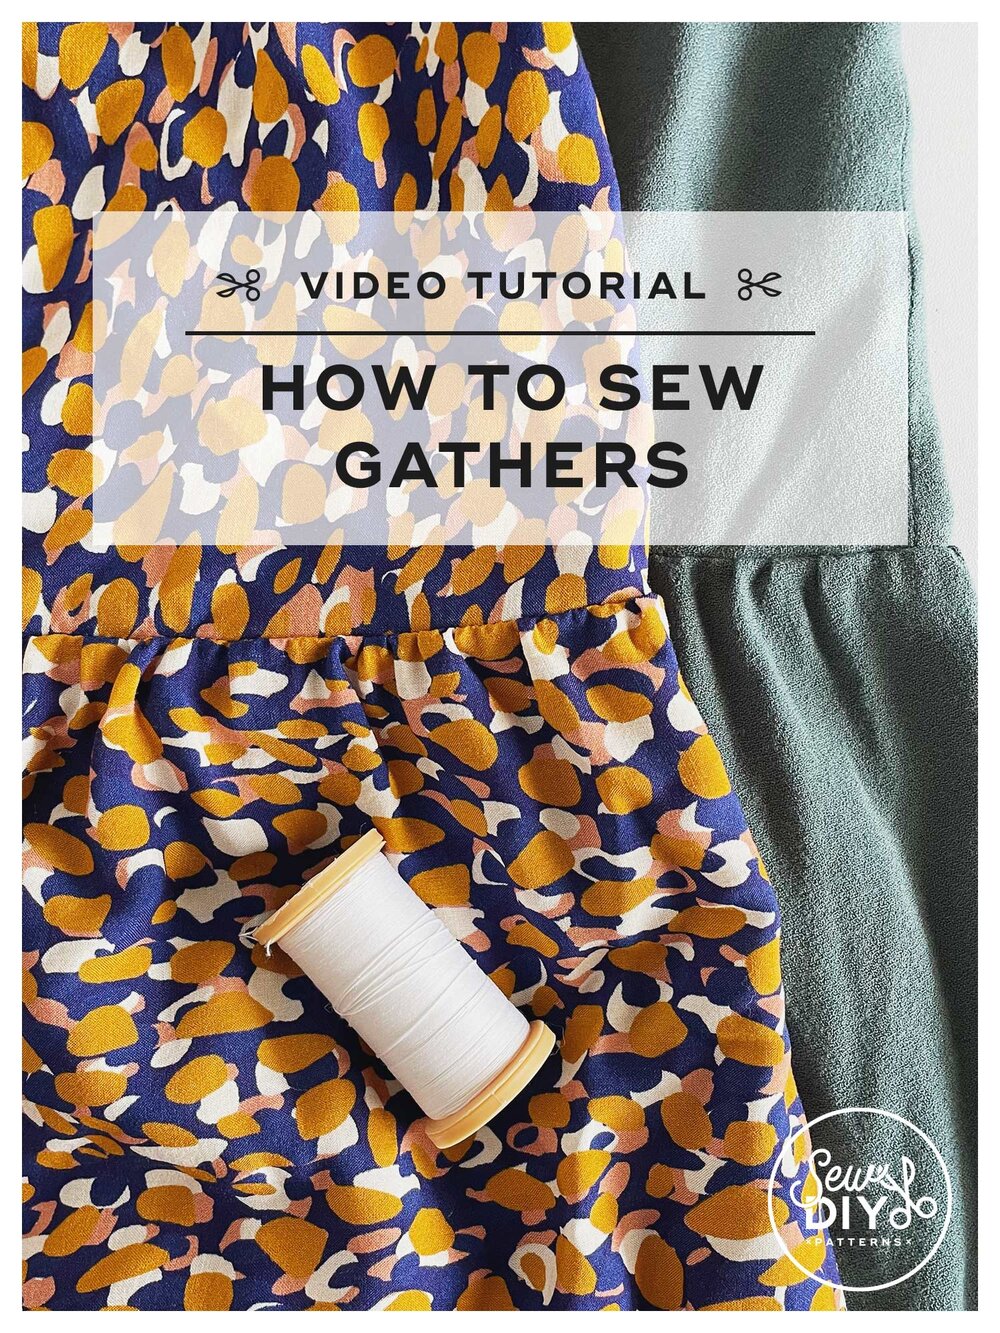 How to sew gathers - Video tutorial